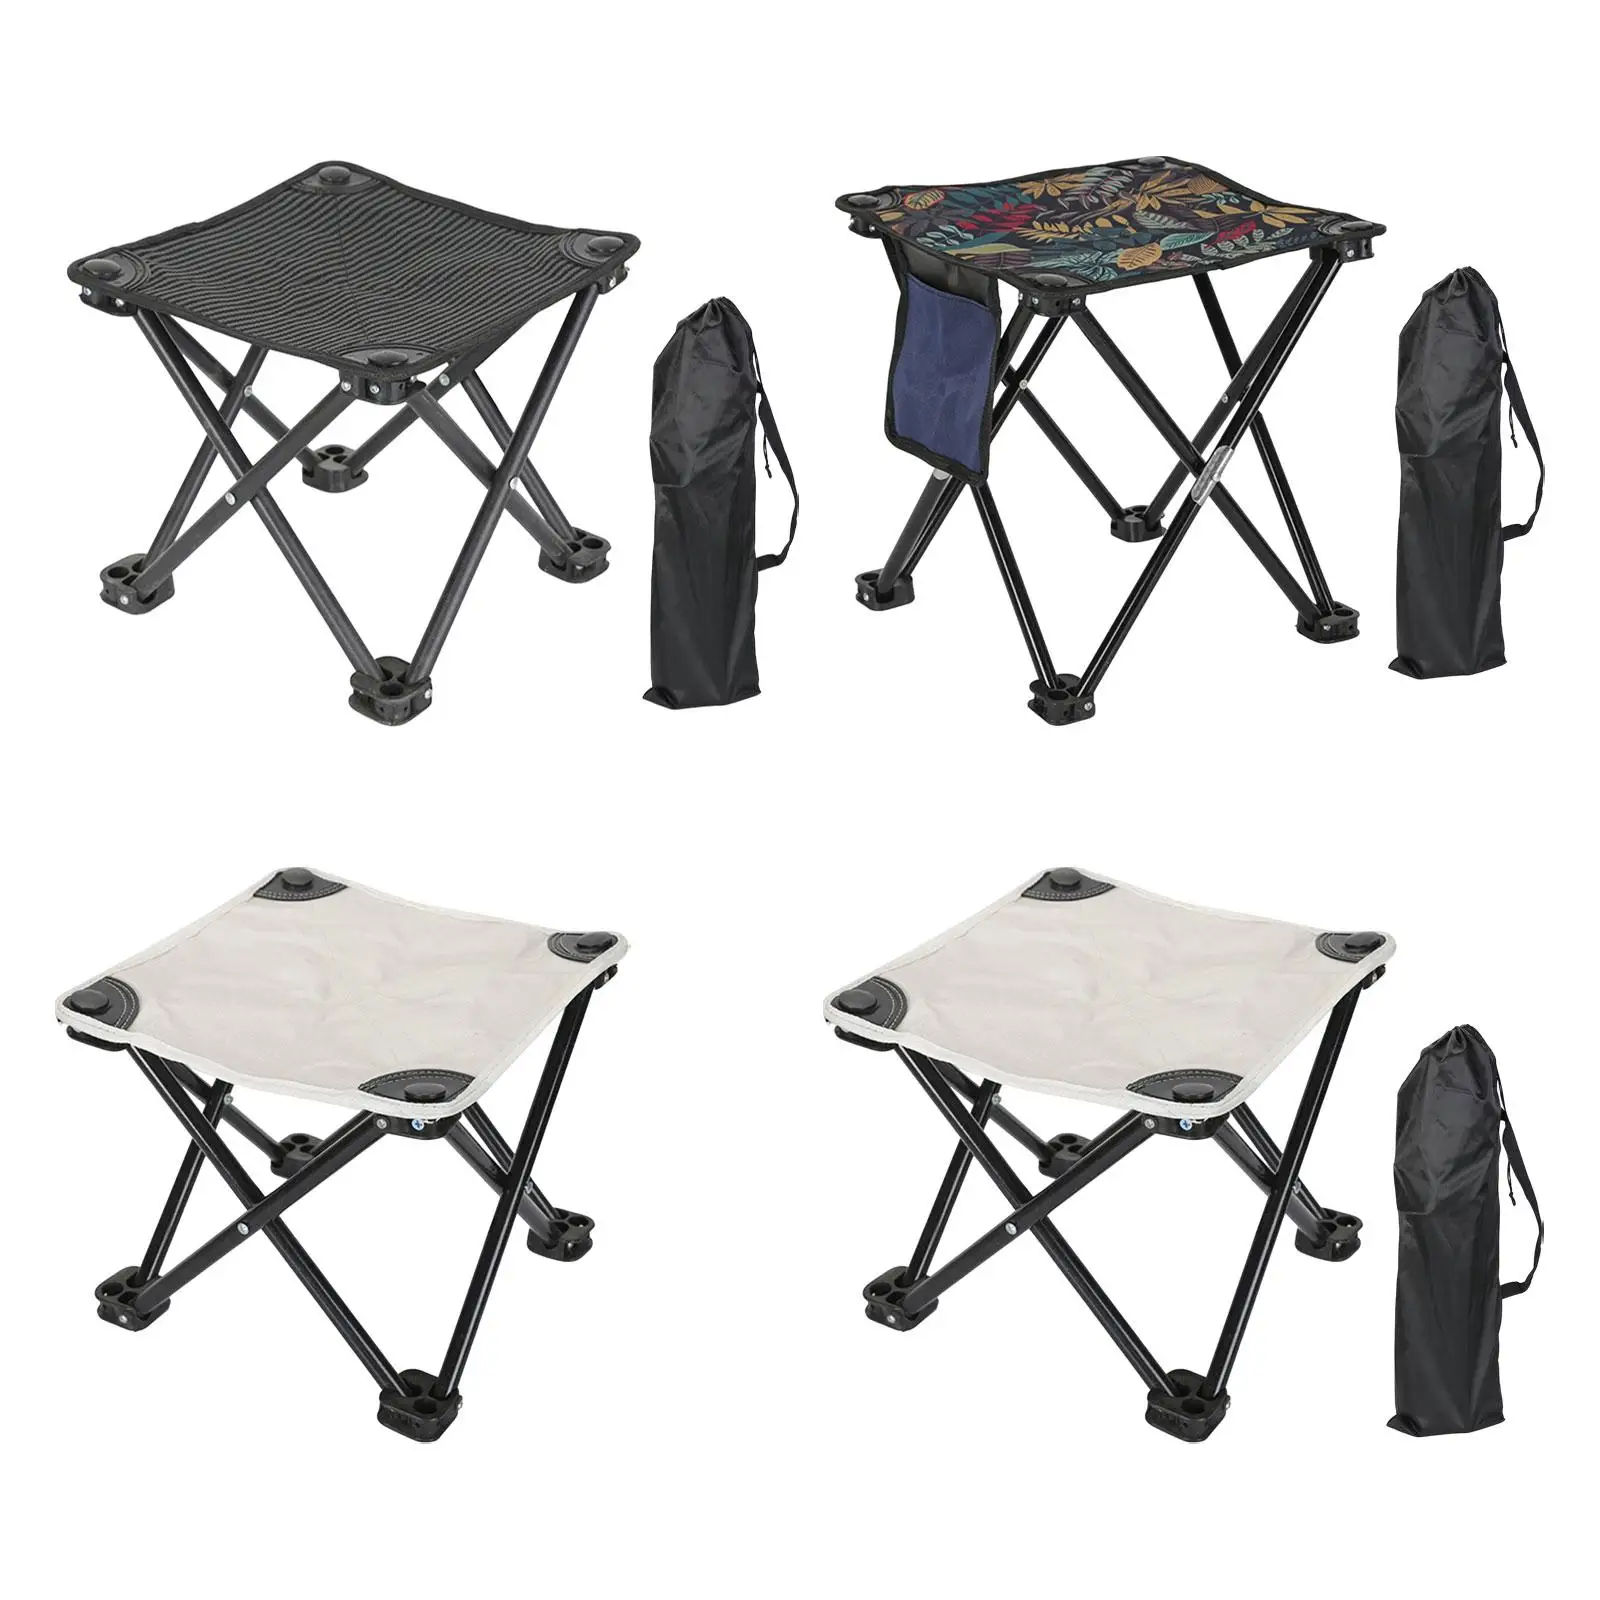 Folding Stool 600D Oxford Cloth Wear Resistant for Adults Foldable Camping Stool for Outdoor Backpacking Traveling Picnic Hiking